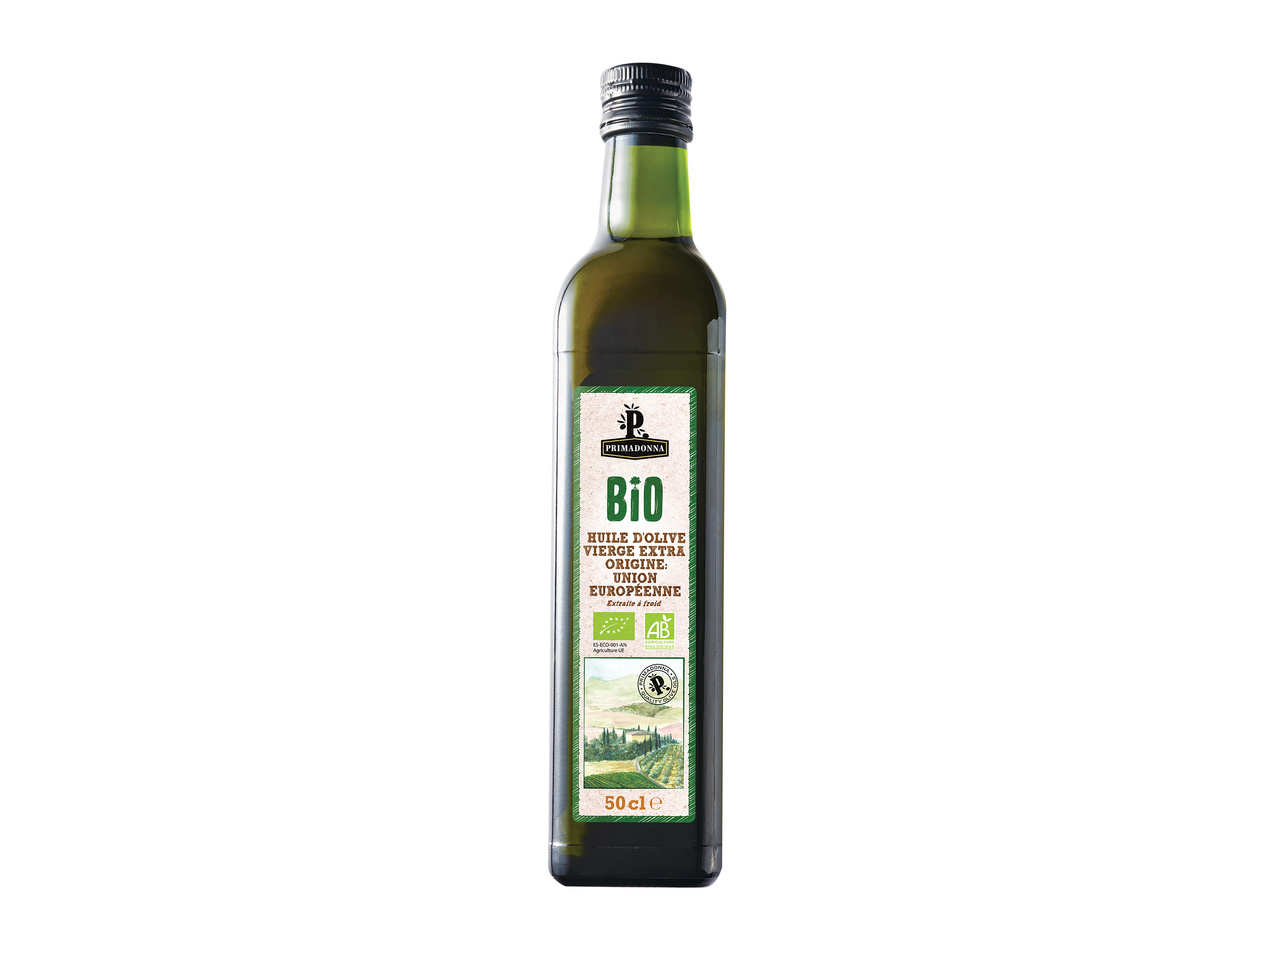 Huile d'olive vierge extra Bio1